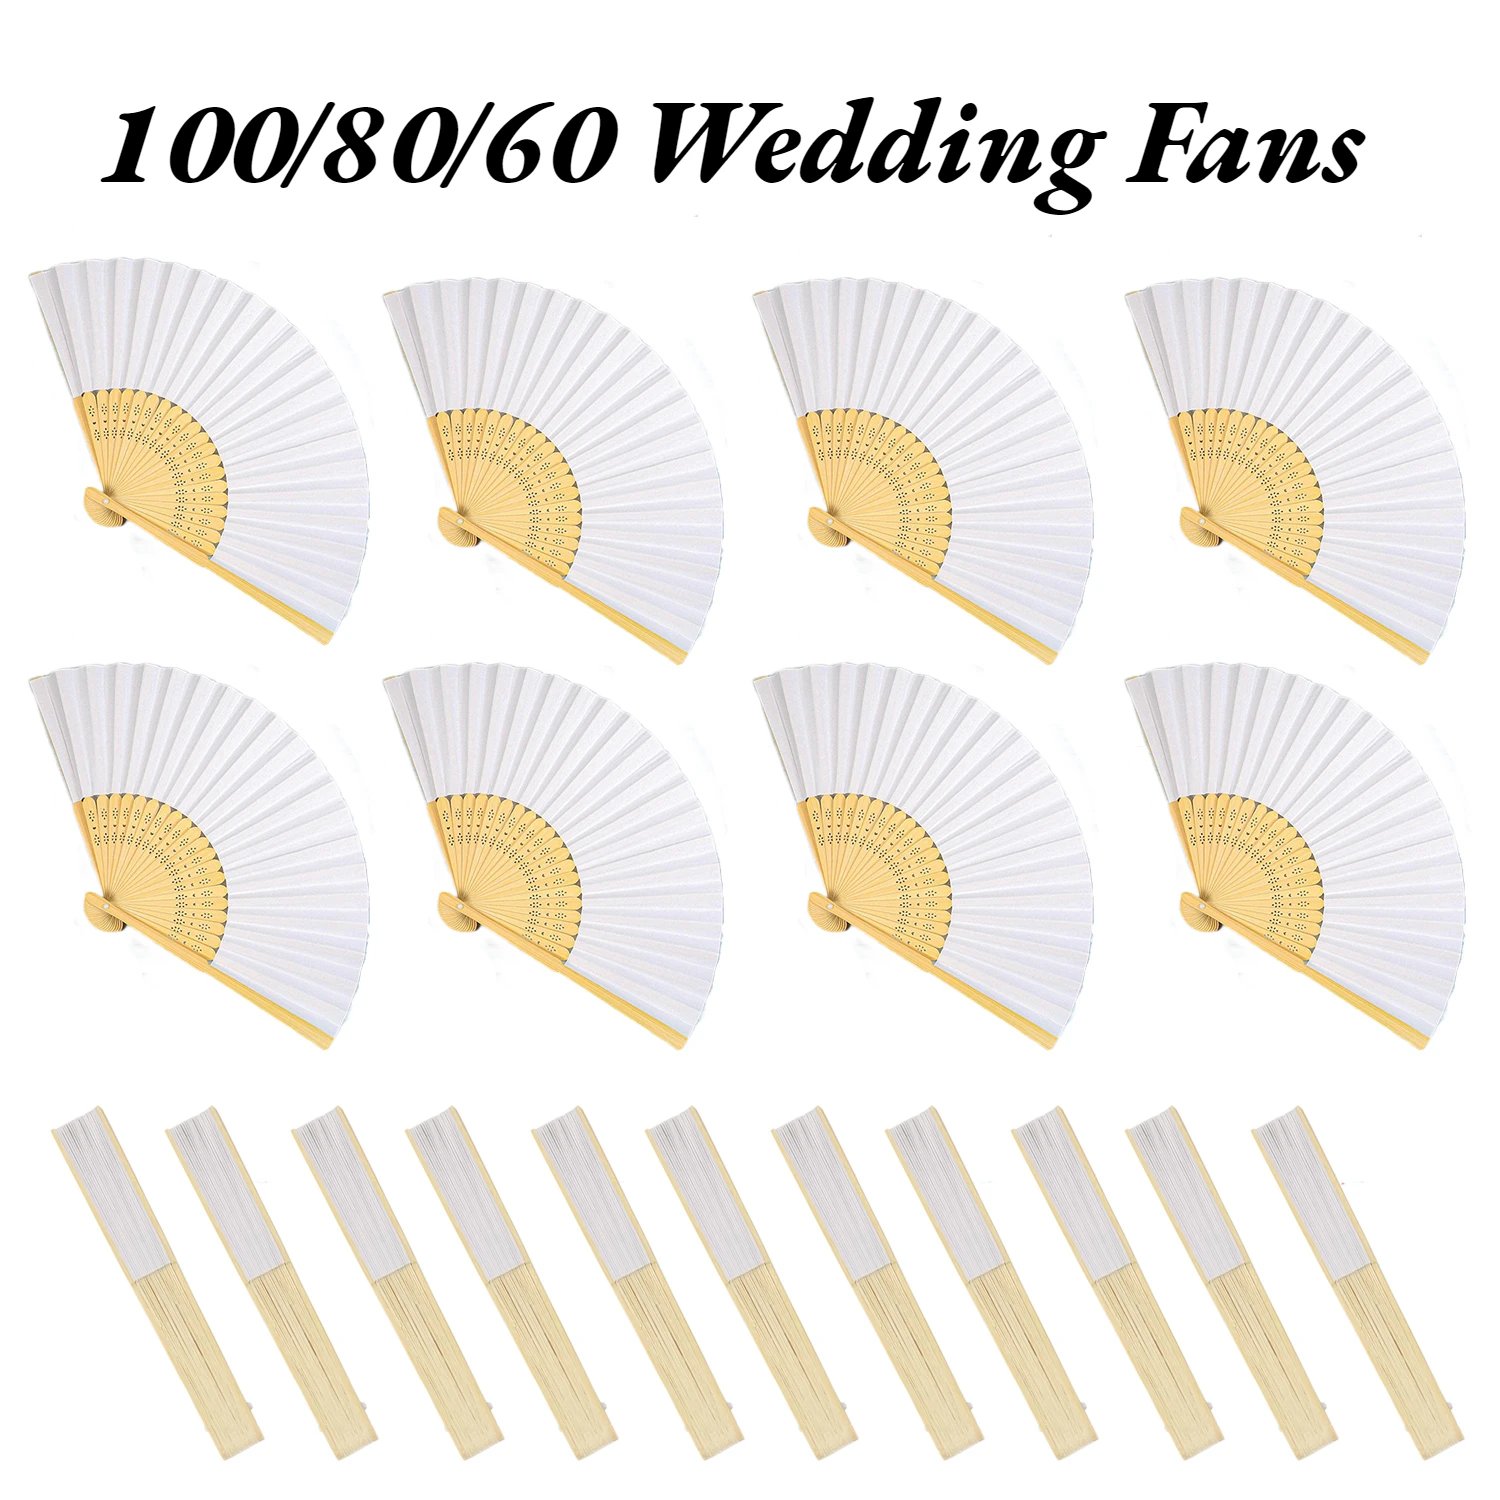 

100/80/60/30Pcs Wedding Hand Fans White Handheld Paper Fans Bamboo Folding Fans for Guest Gift/Home Decoration/Summer Essentials